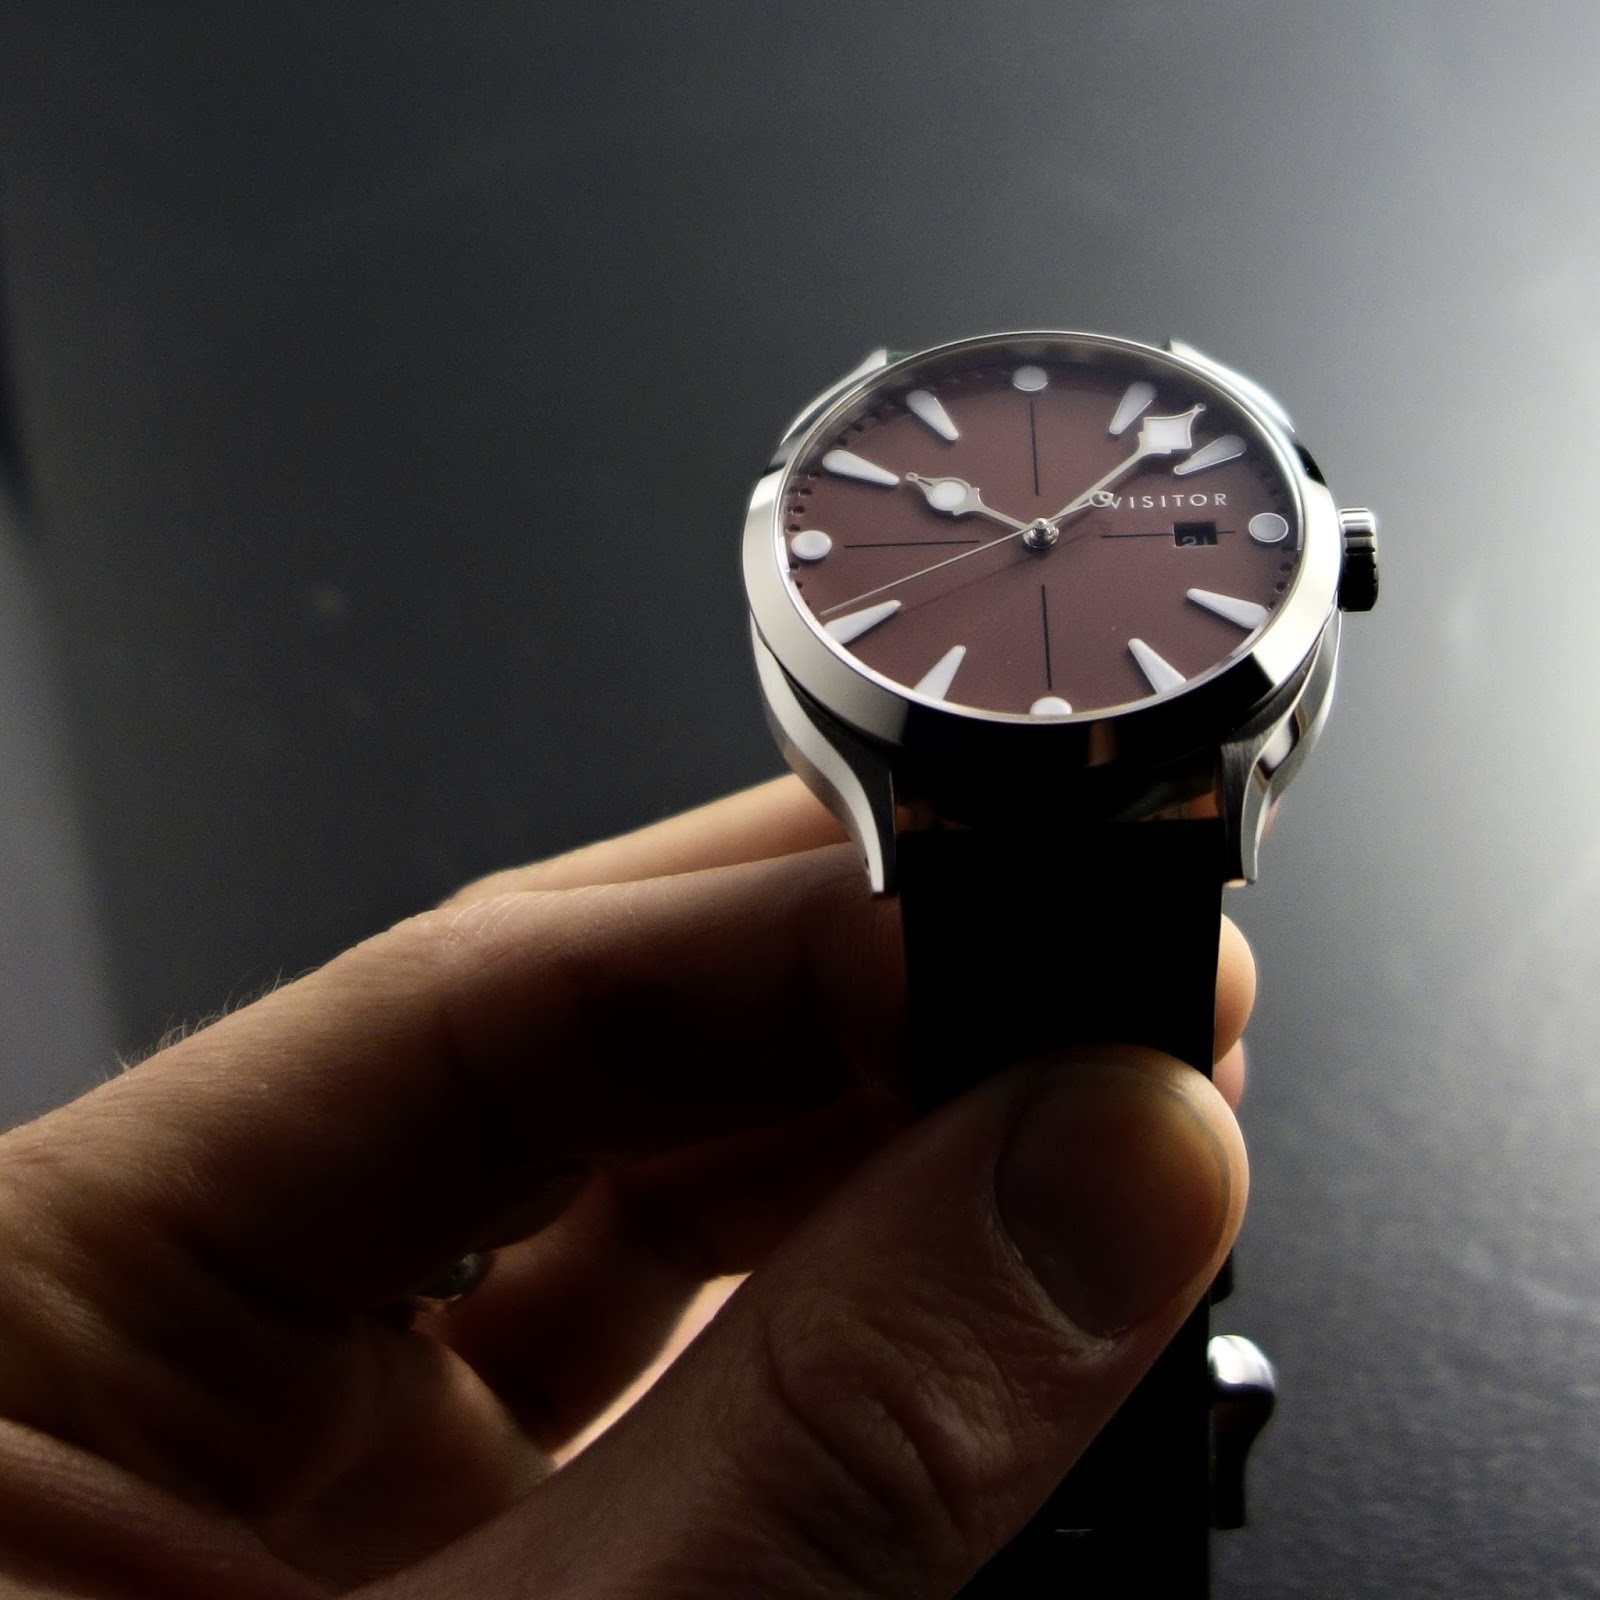 New Visitor Watches, Part 1: The Calligraph Linden